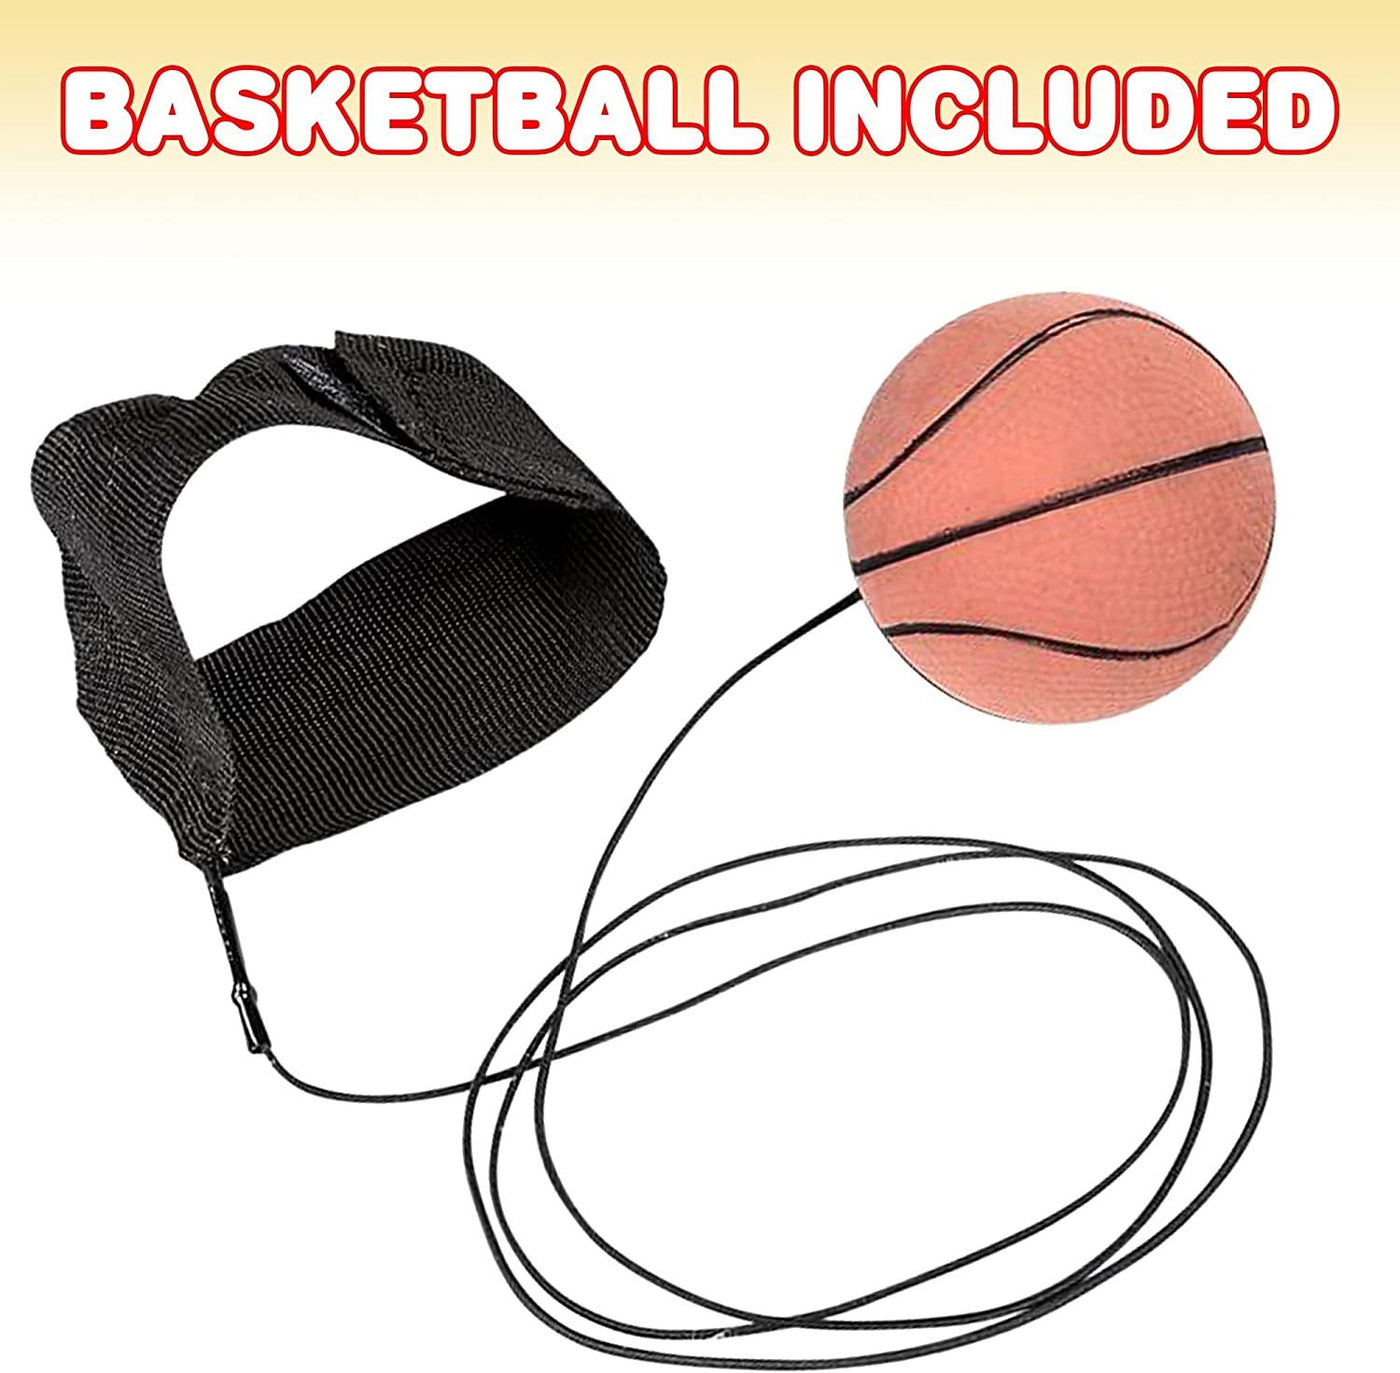 2.25" Sports Wrist Balls - Set of 3 - Includes Basketball, Baseball, and Soccer Ball Wristband Toys - Durable Foam String Attached Rebound Balls - Party Favor, Gift Idea for Kids